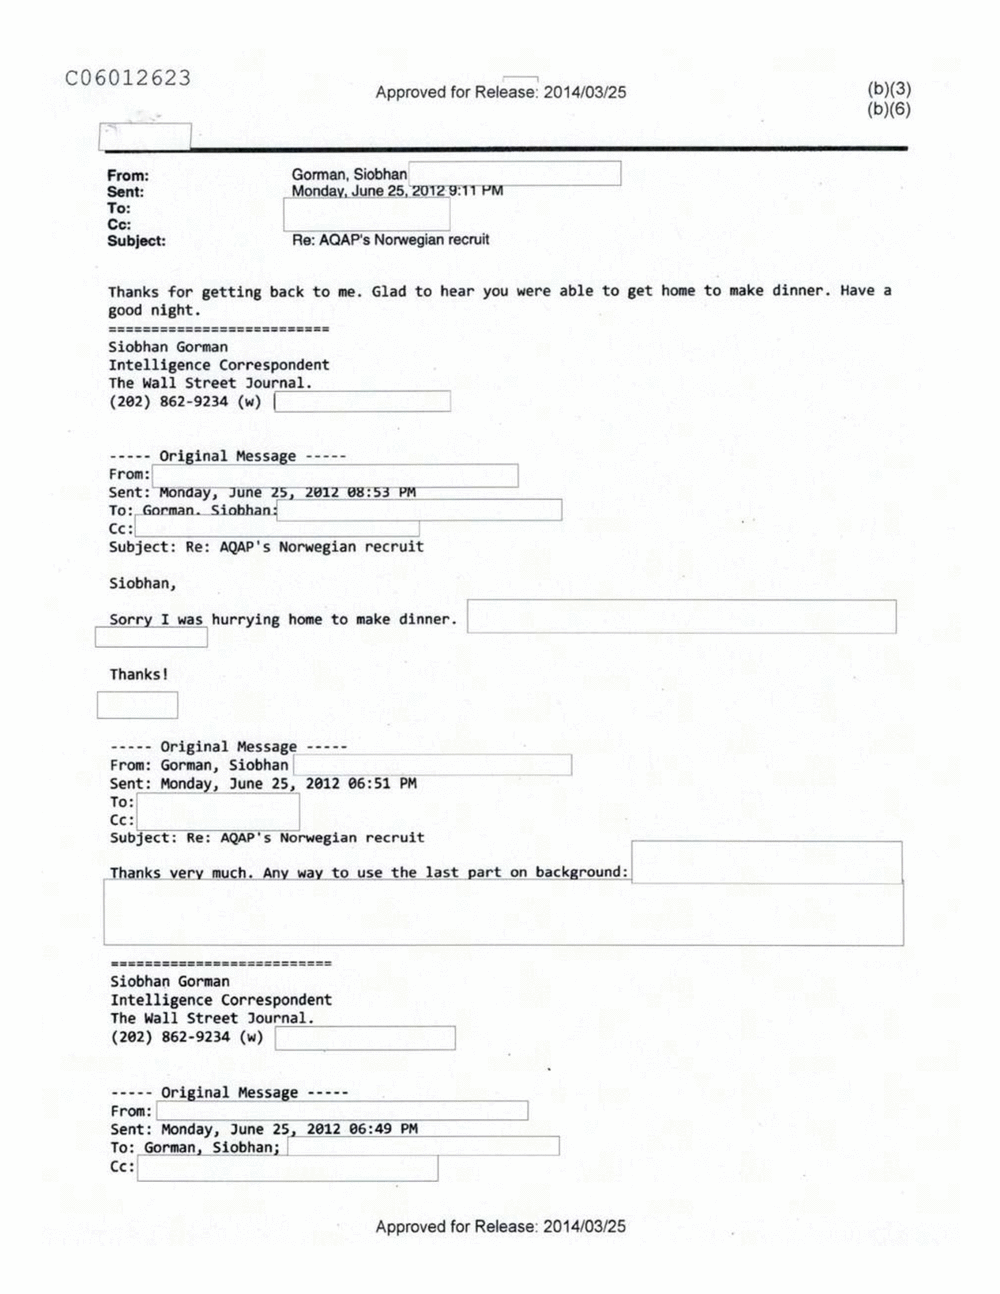 Page 177 from Email Correspondence Between Reporters and CIA Flacks